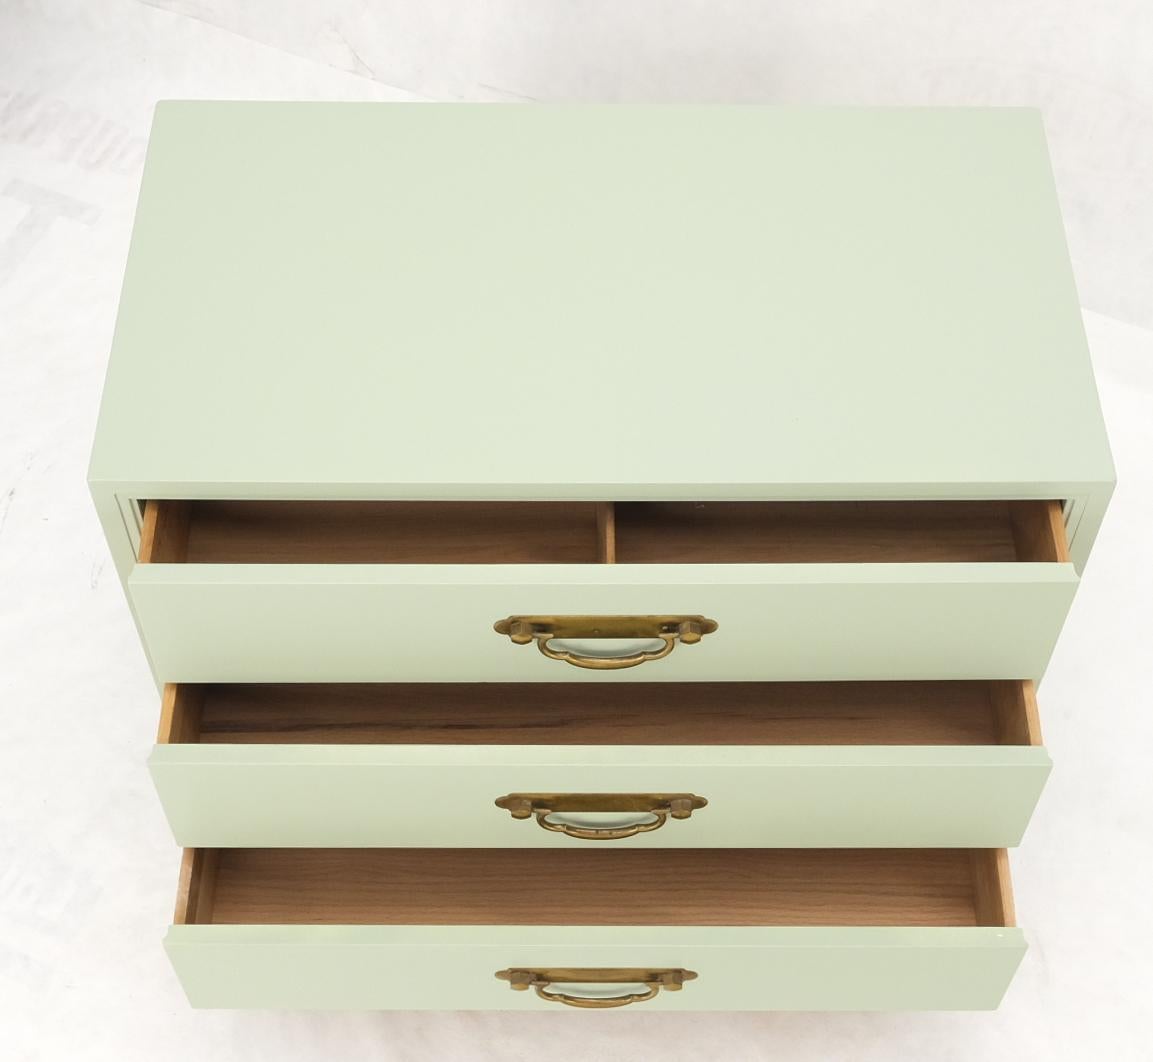 American Light Olive Lacquer Oriental Base Legs 3 Drawer Accent Dresser Bachelor Chest For Sale